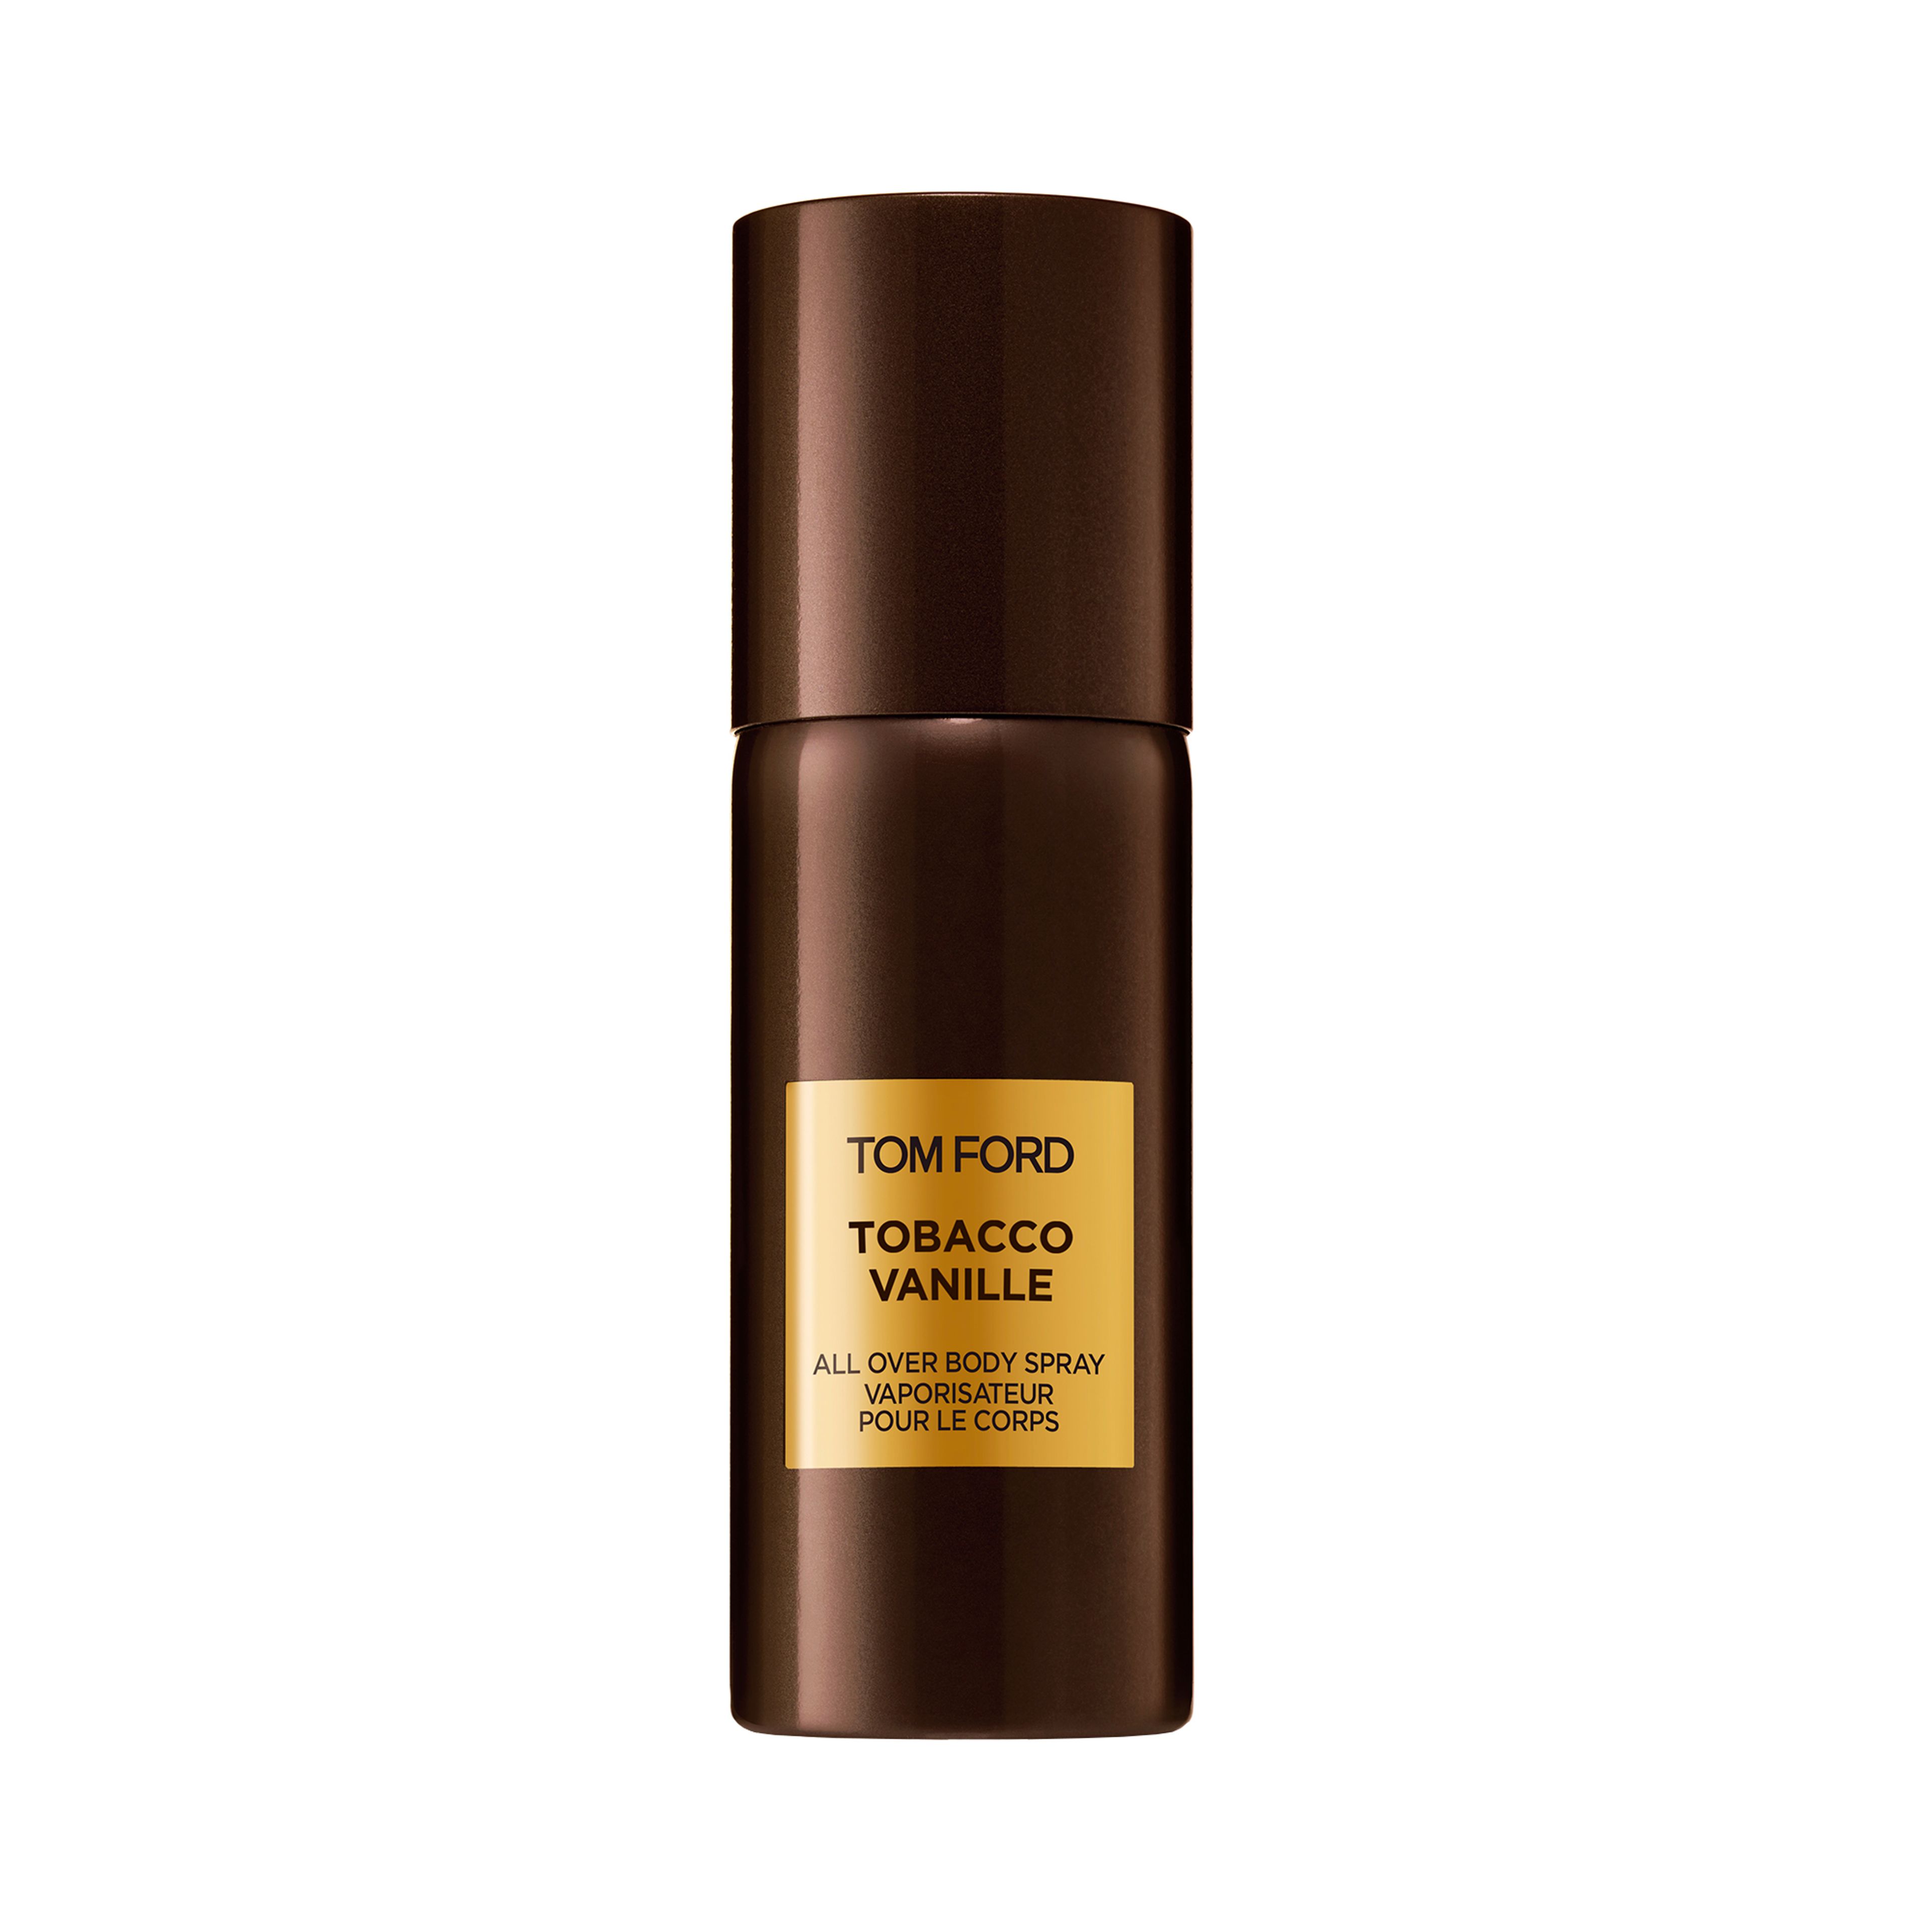 Tom Ford Tobacco Vanille All Over Body Spray 1